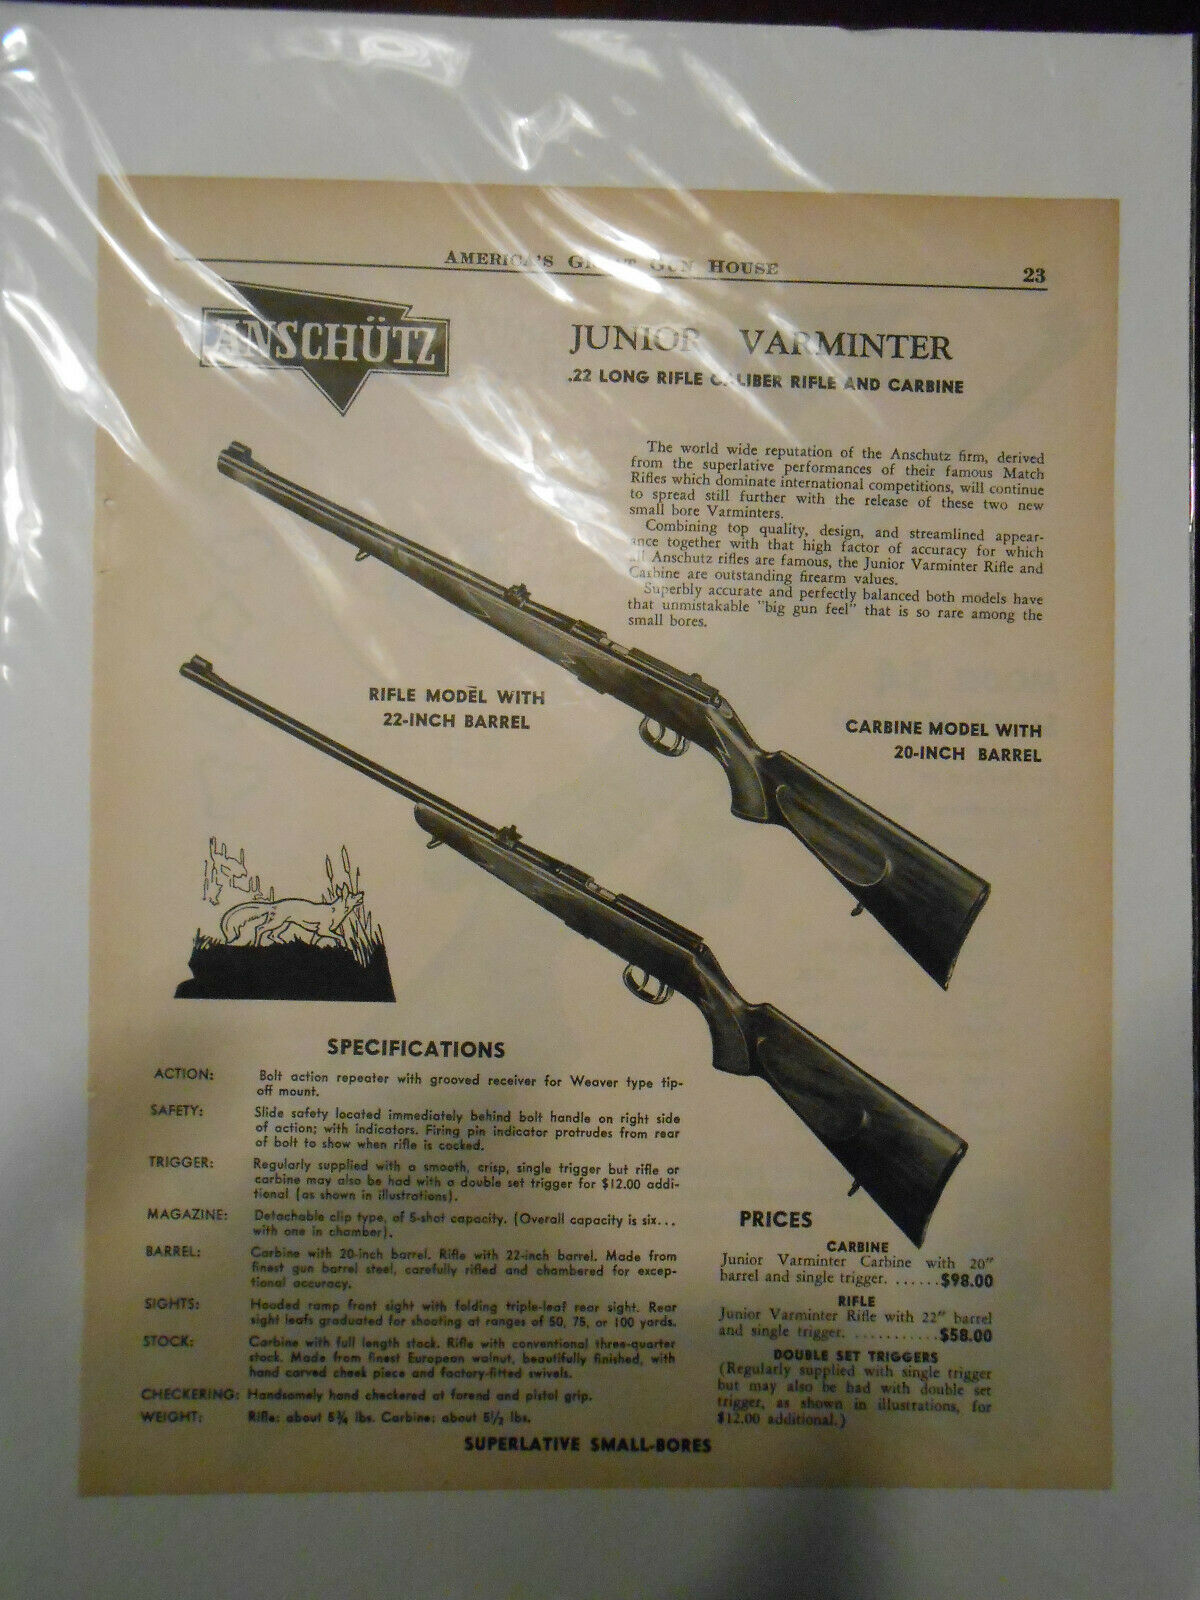 Anschutz 1958 Vintage 22 Rifle Add From American Great Gun House Nice Deal !!!!!